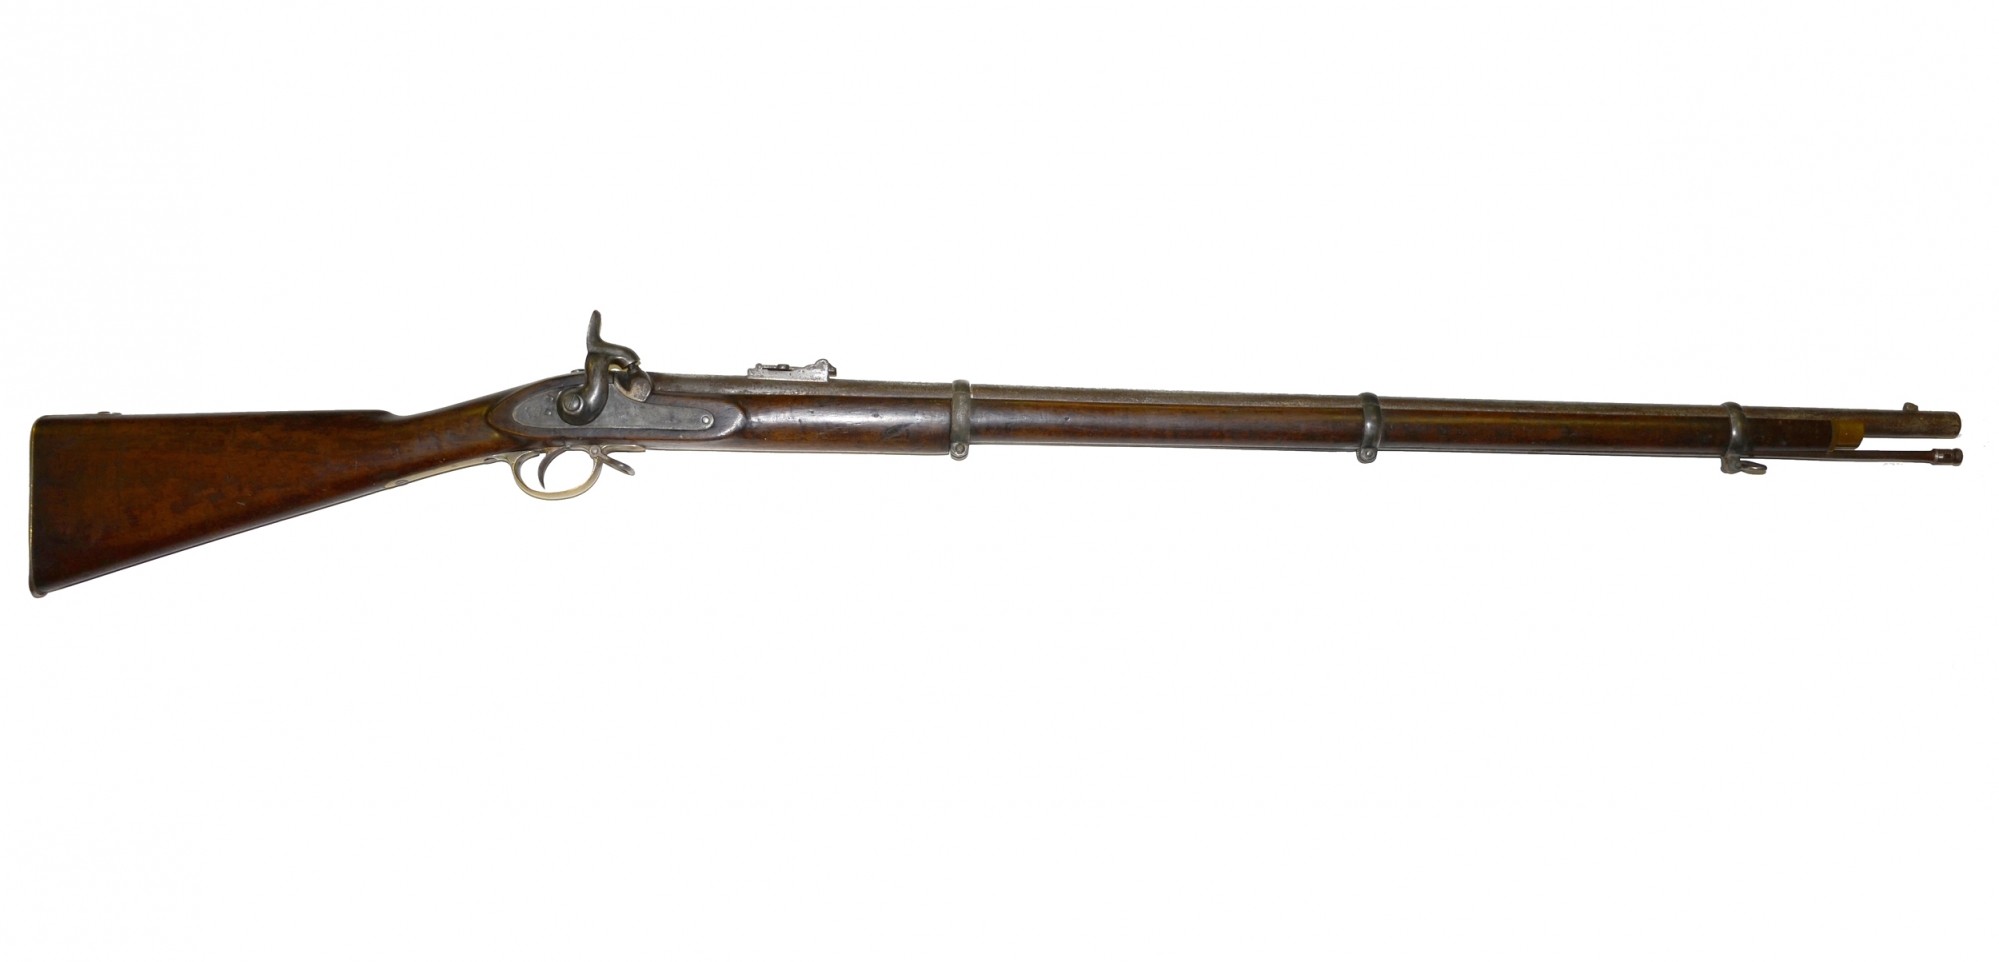 Pattern 1853 enfield musket identified to new jersey soldier.